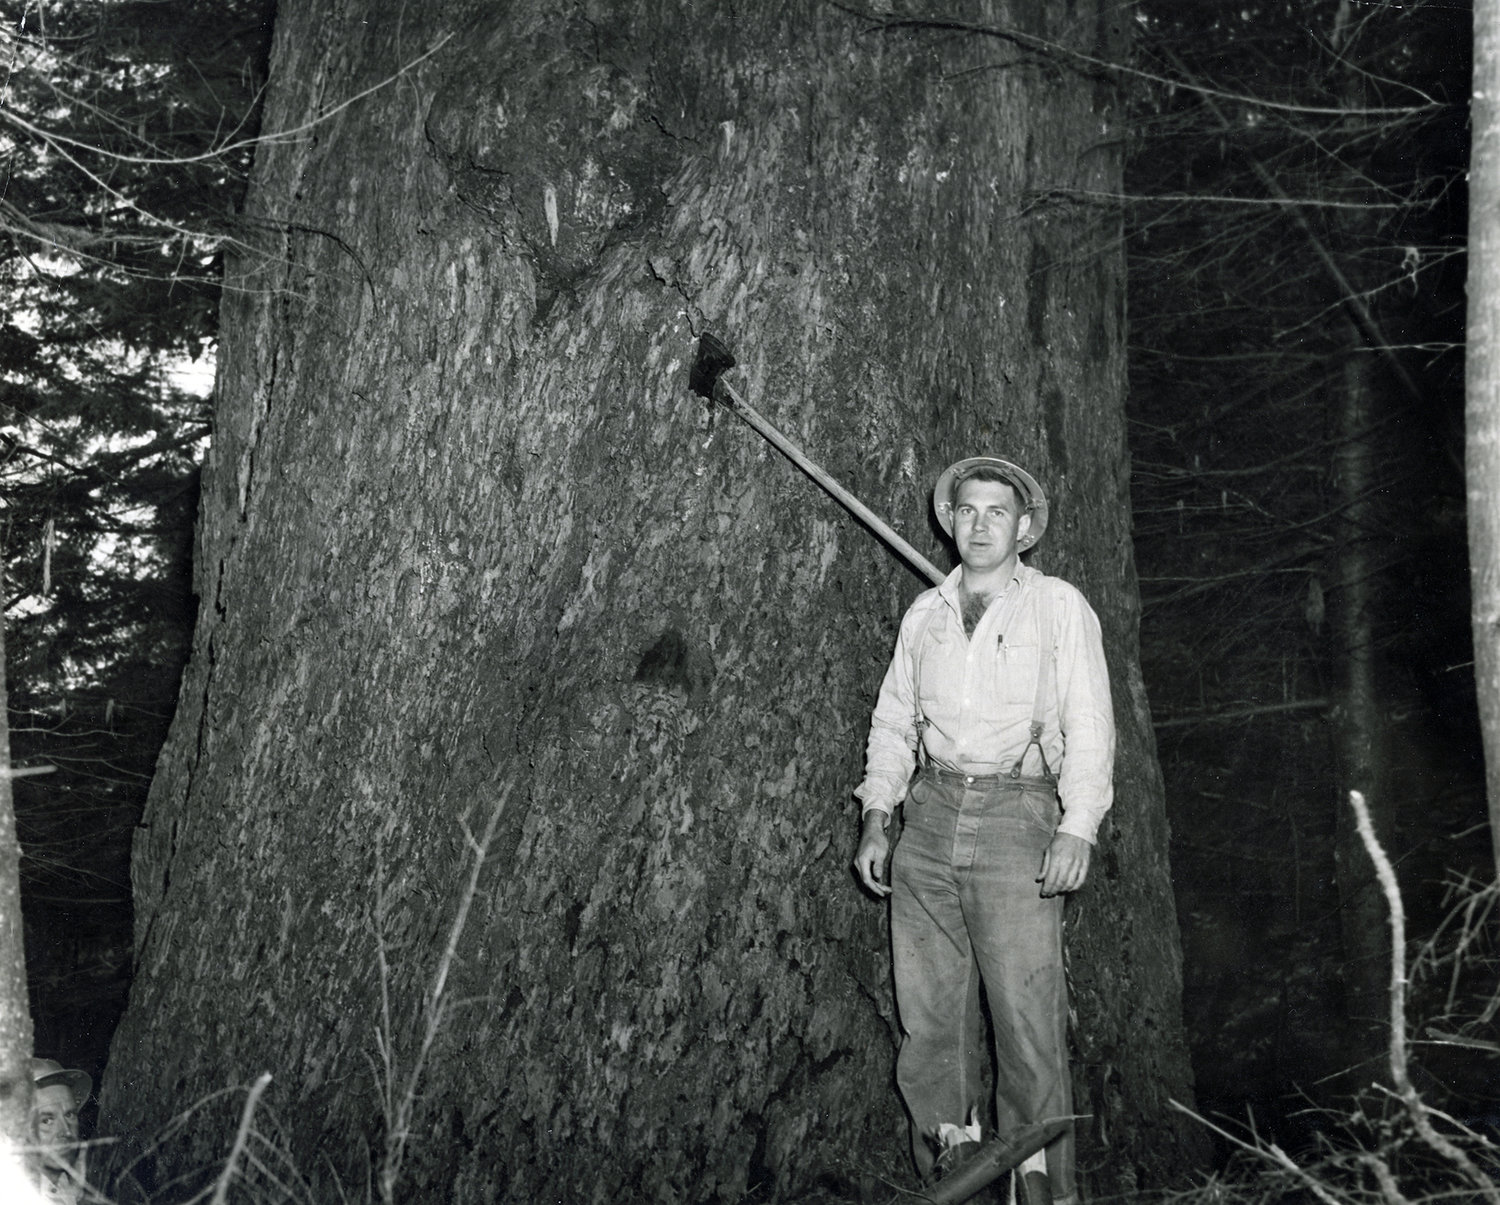 A man stands with an axe in the big tree in 1955.